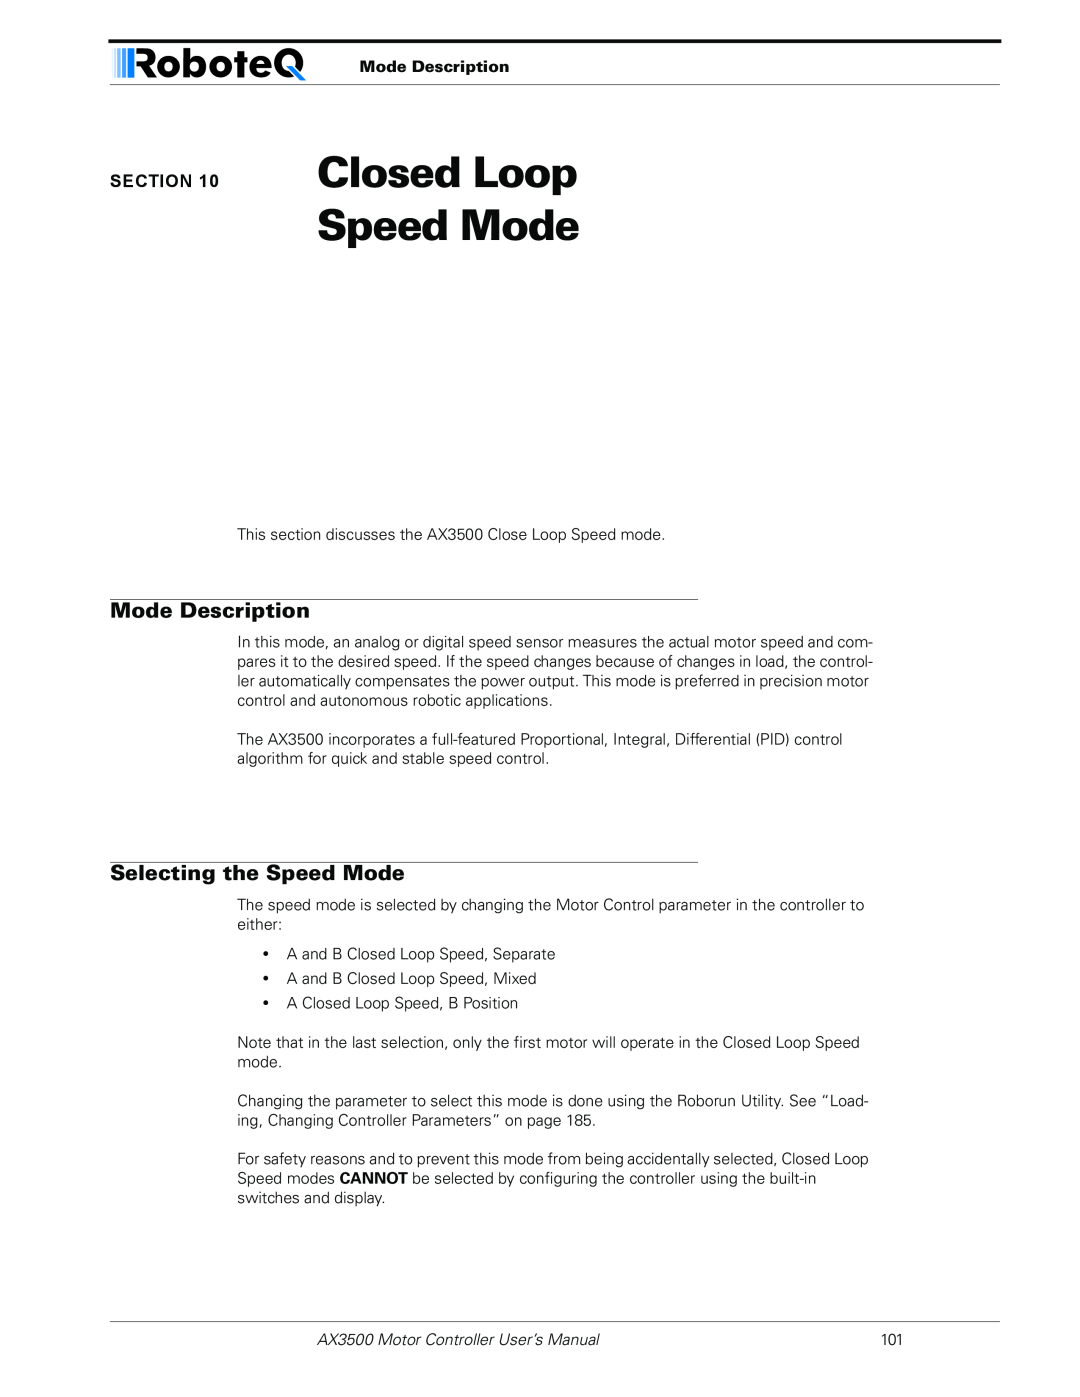 RoboteQ Closed Loop Speed Mode, Selecting the Speed Mode, Mode Description, AX3500 Motor Controller User’s Manual 